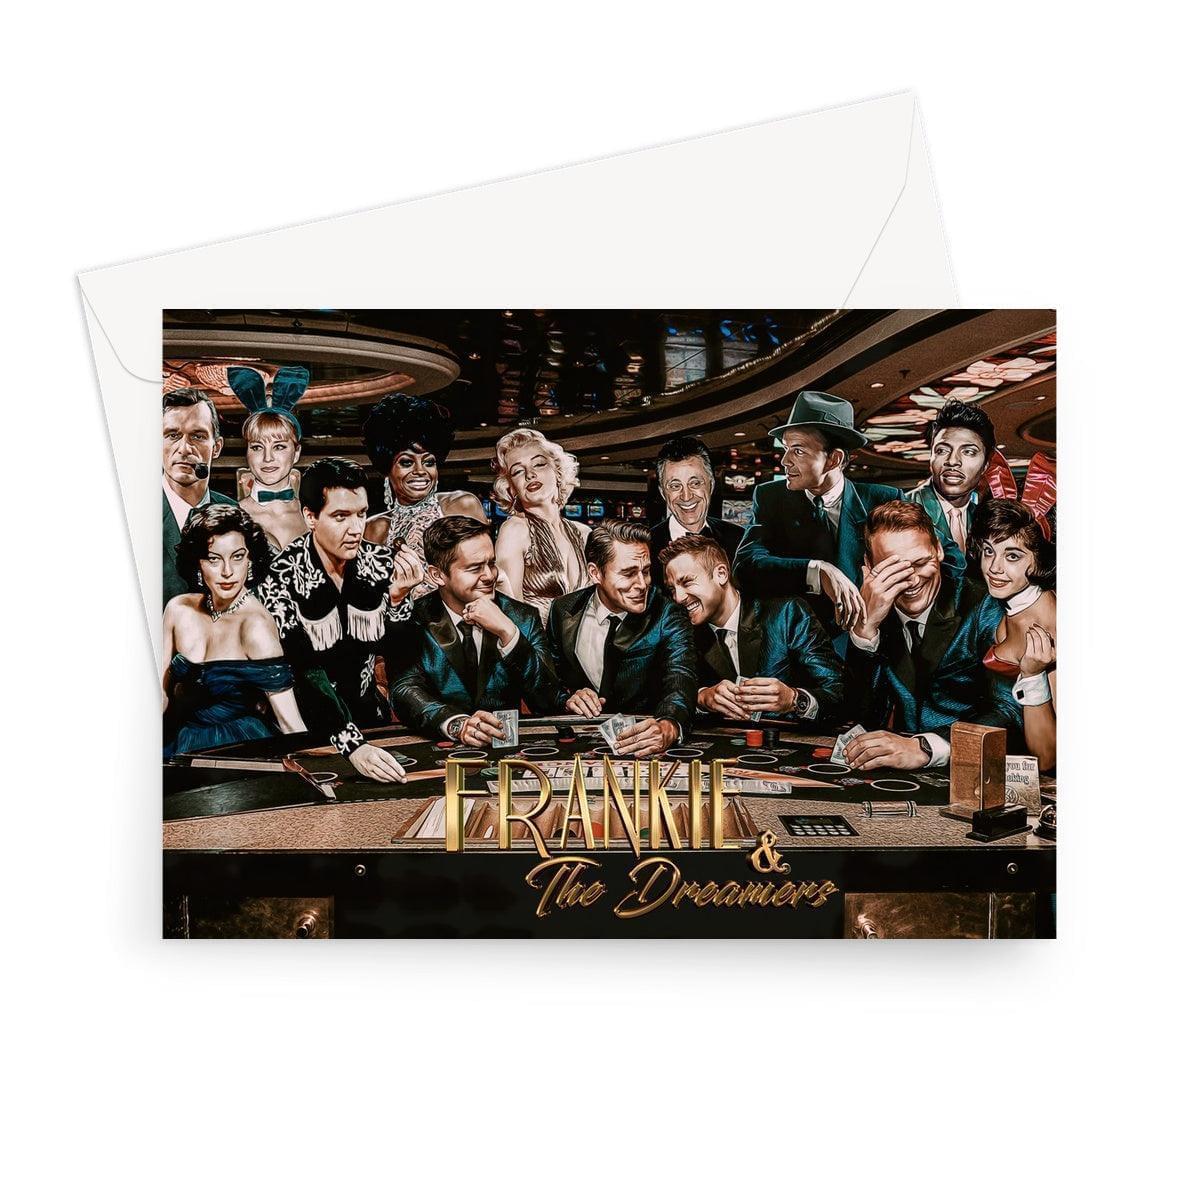 Frankie And The Dreamers Casino 2 Greeting Card | Stationery 7"x5" 10 Cards